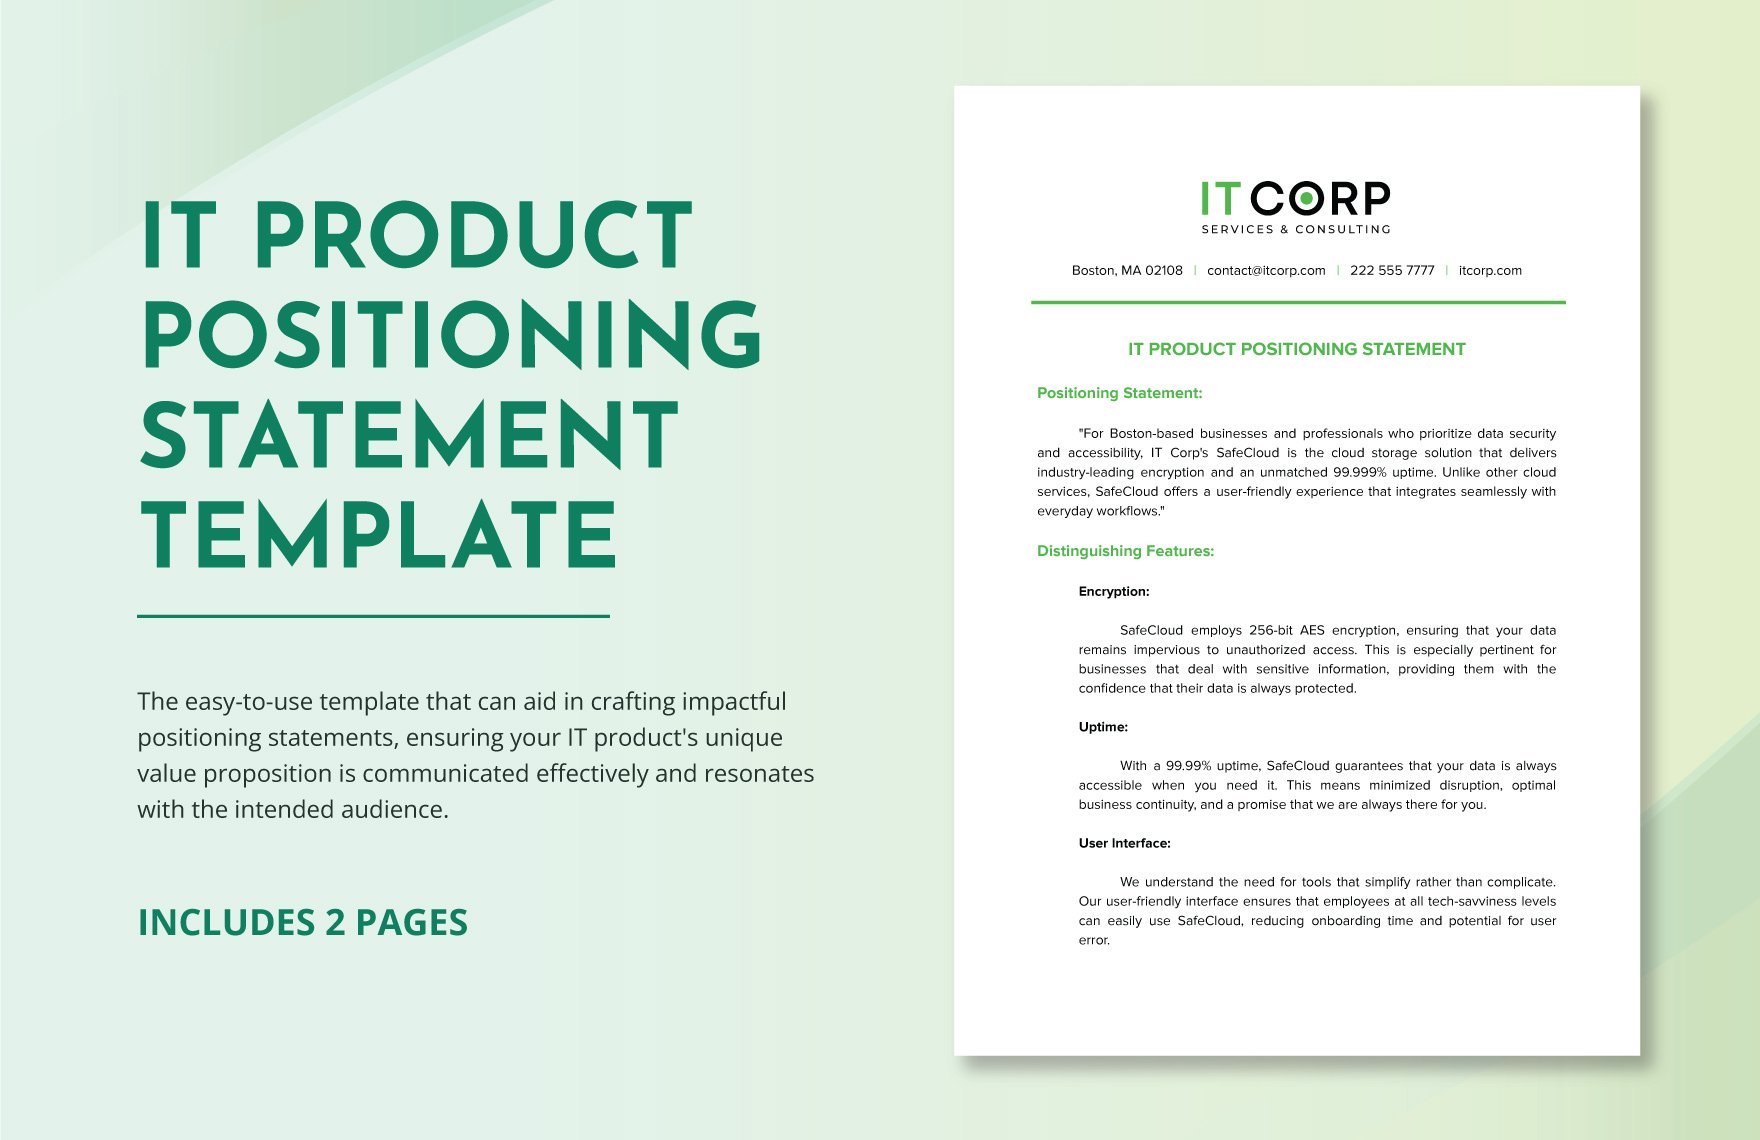 IT Product Positioning Statement Template in Word, Google Docs, PDF